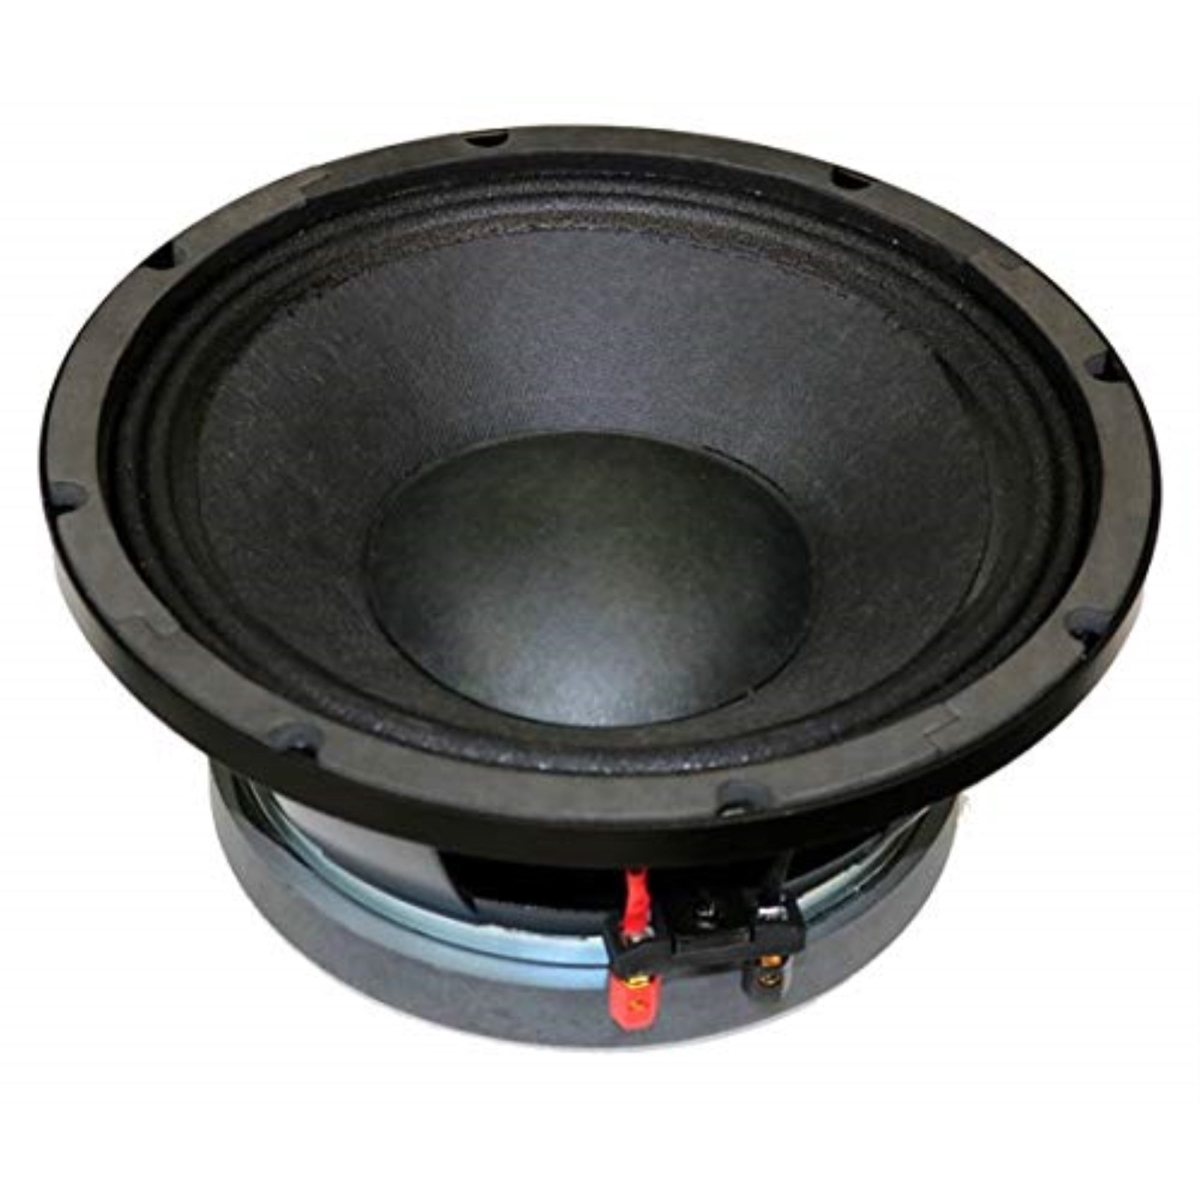 Picture of Deejay LED DESPACITO10 10 in. High Performance High Power Despacito Woofer with Large Magnet Structure